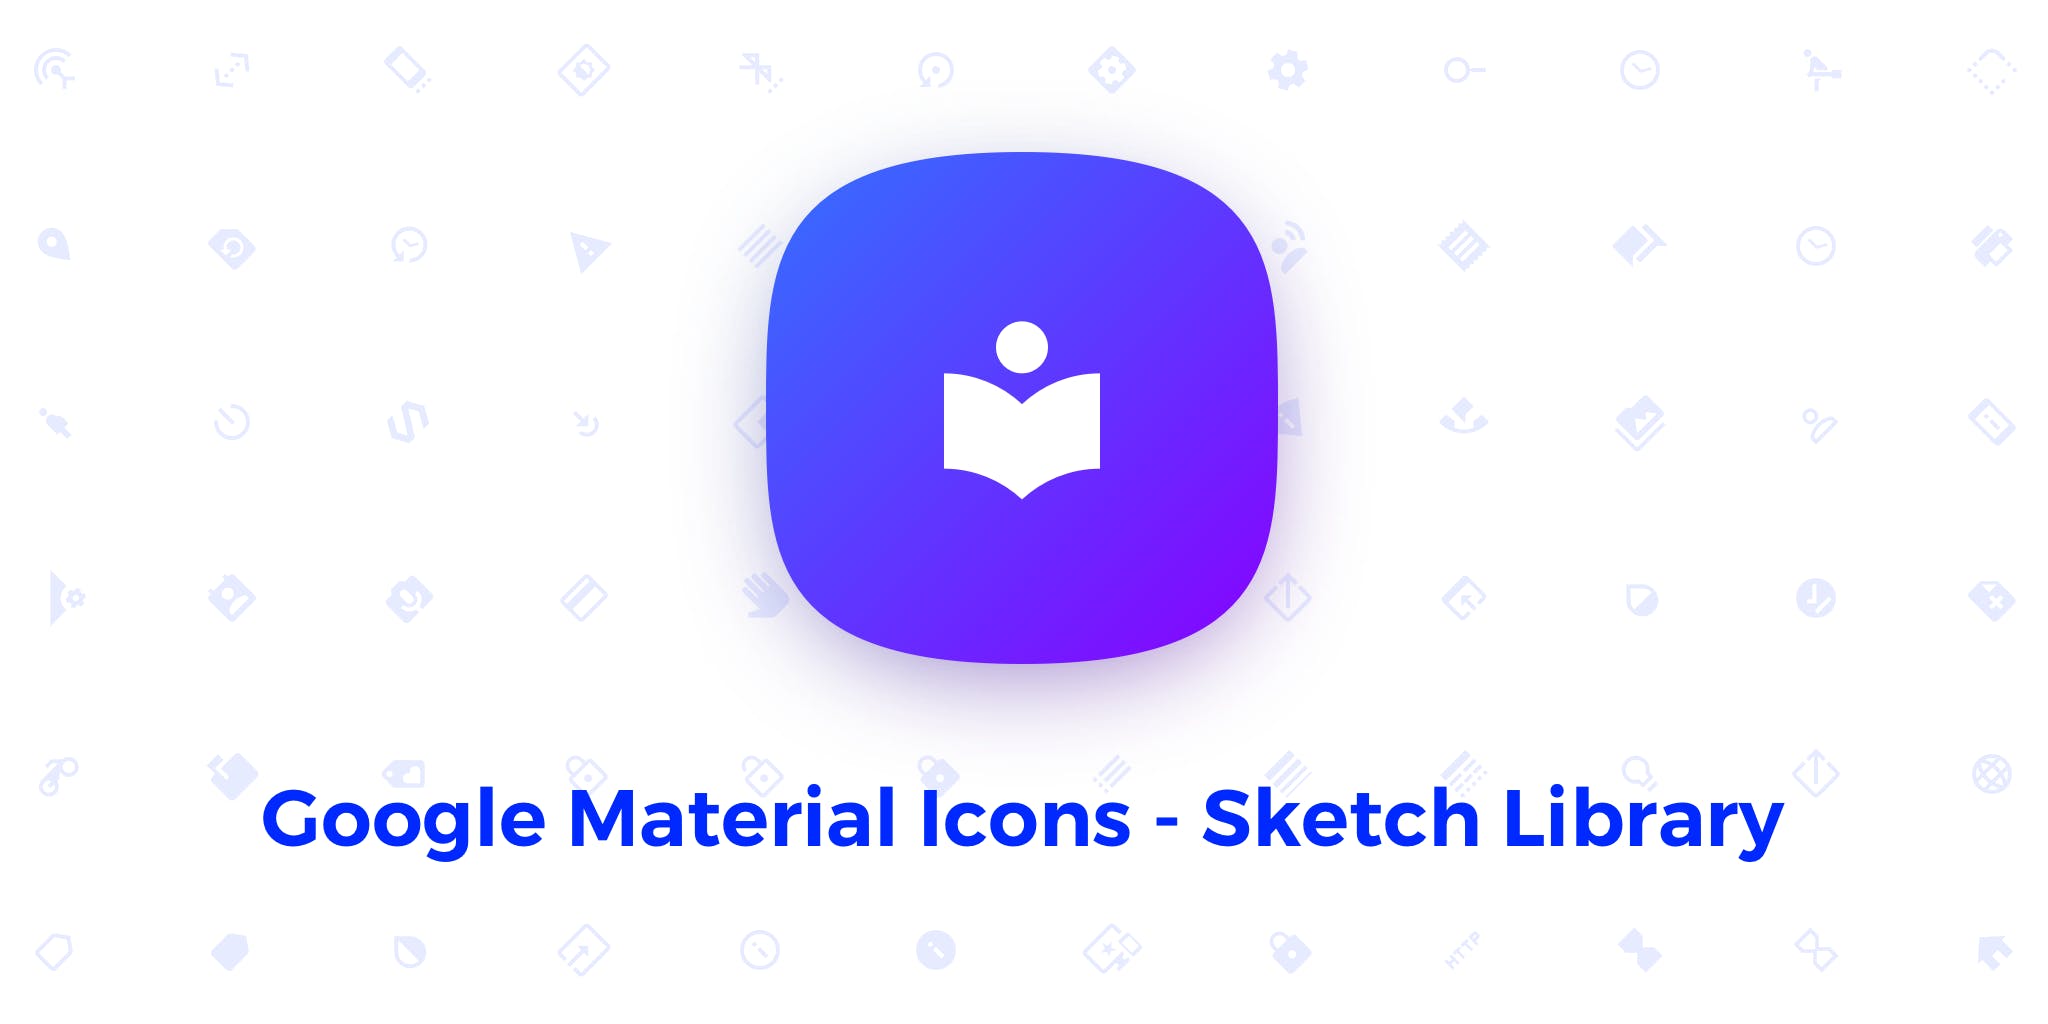 Google Material Icons - Sketch Library media 1